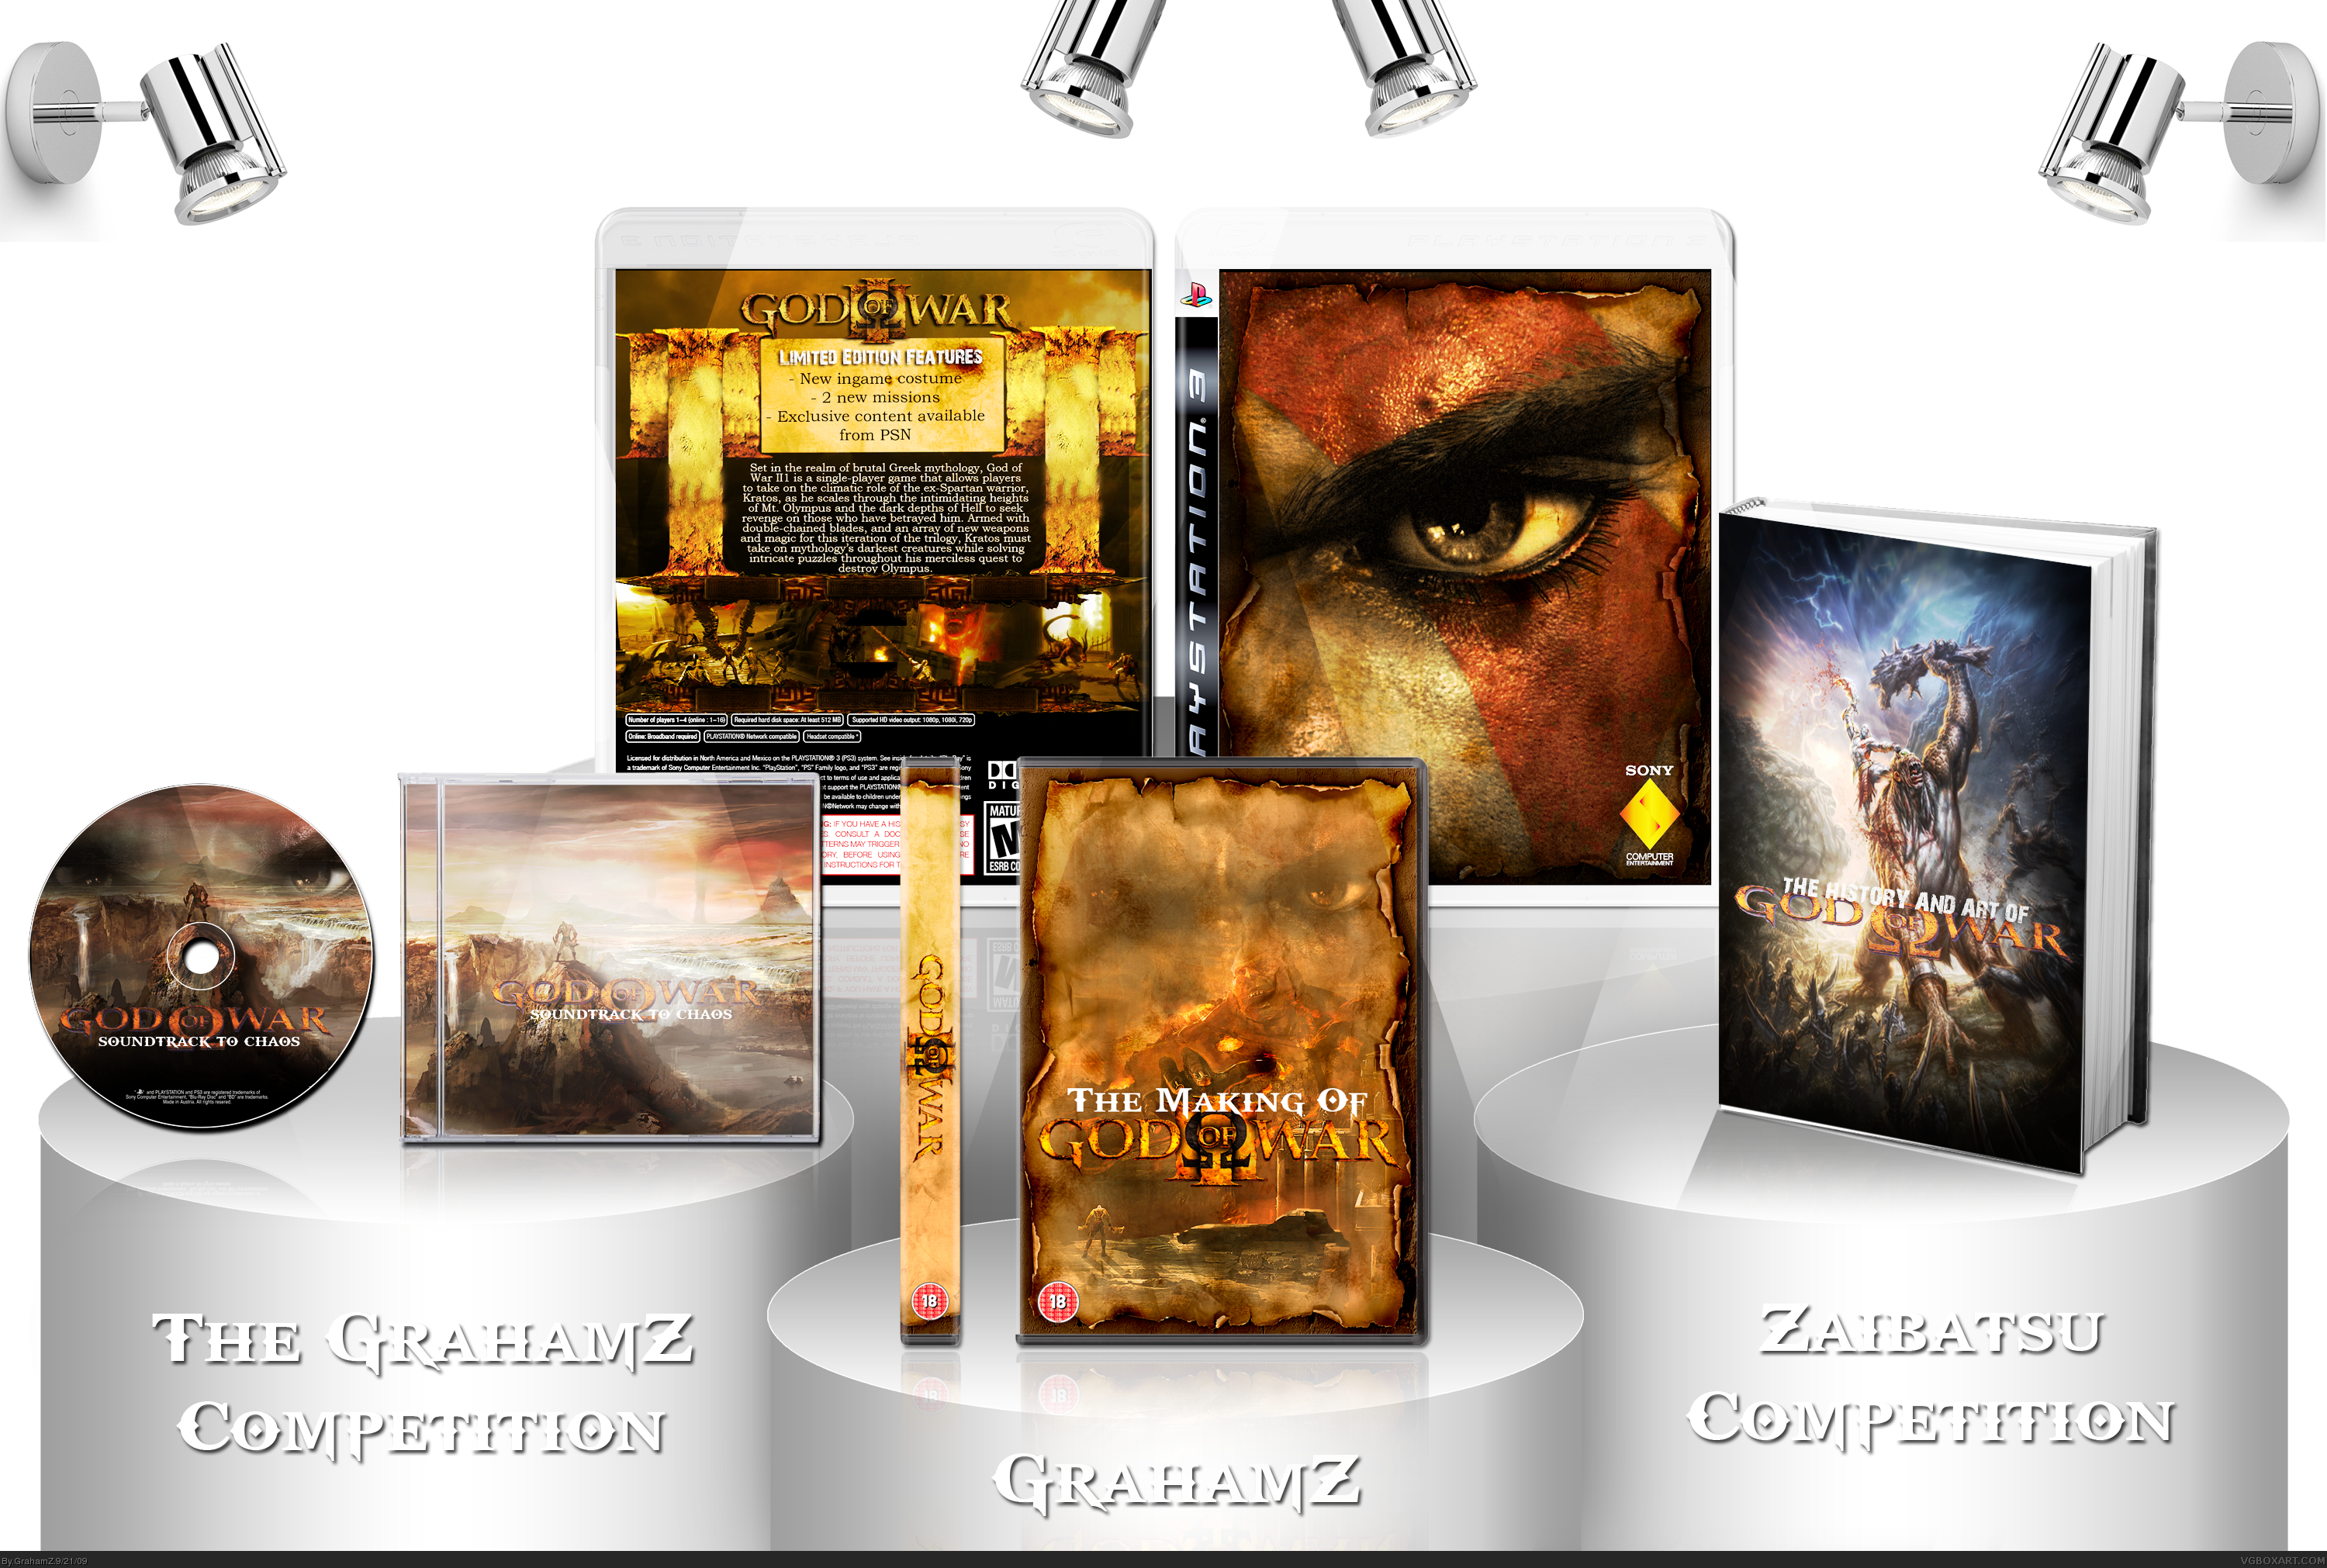 God of War III:  Limited Collector's Edition box cover